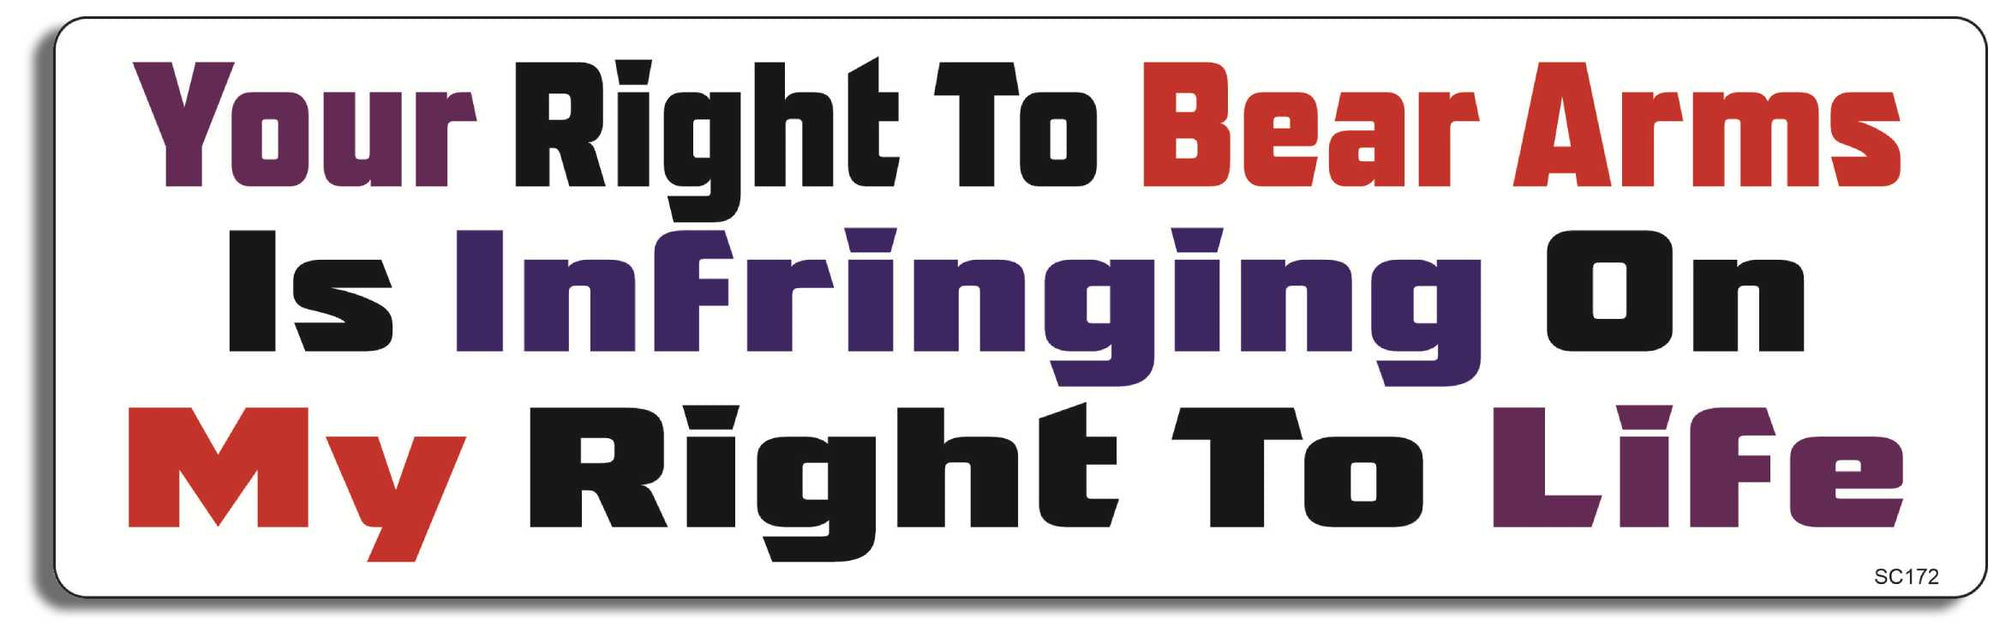 Your Right To Bear Arms Is Infringing On My Right To Life - 3" x 10" -  Decal Bumper Sticker-political Bumper Sticker Car Magnet Your Right To Bear Arms Is Infringing-  Decal for carsanti gun, anti nra, assault weapons, ban assault weapons, ban guns, Gun control